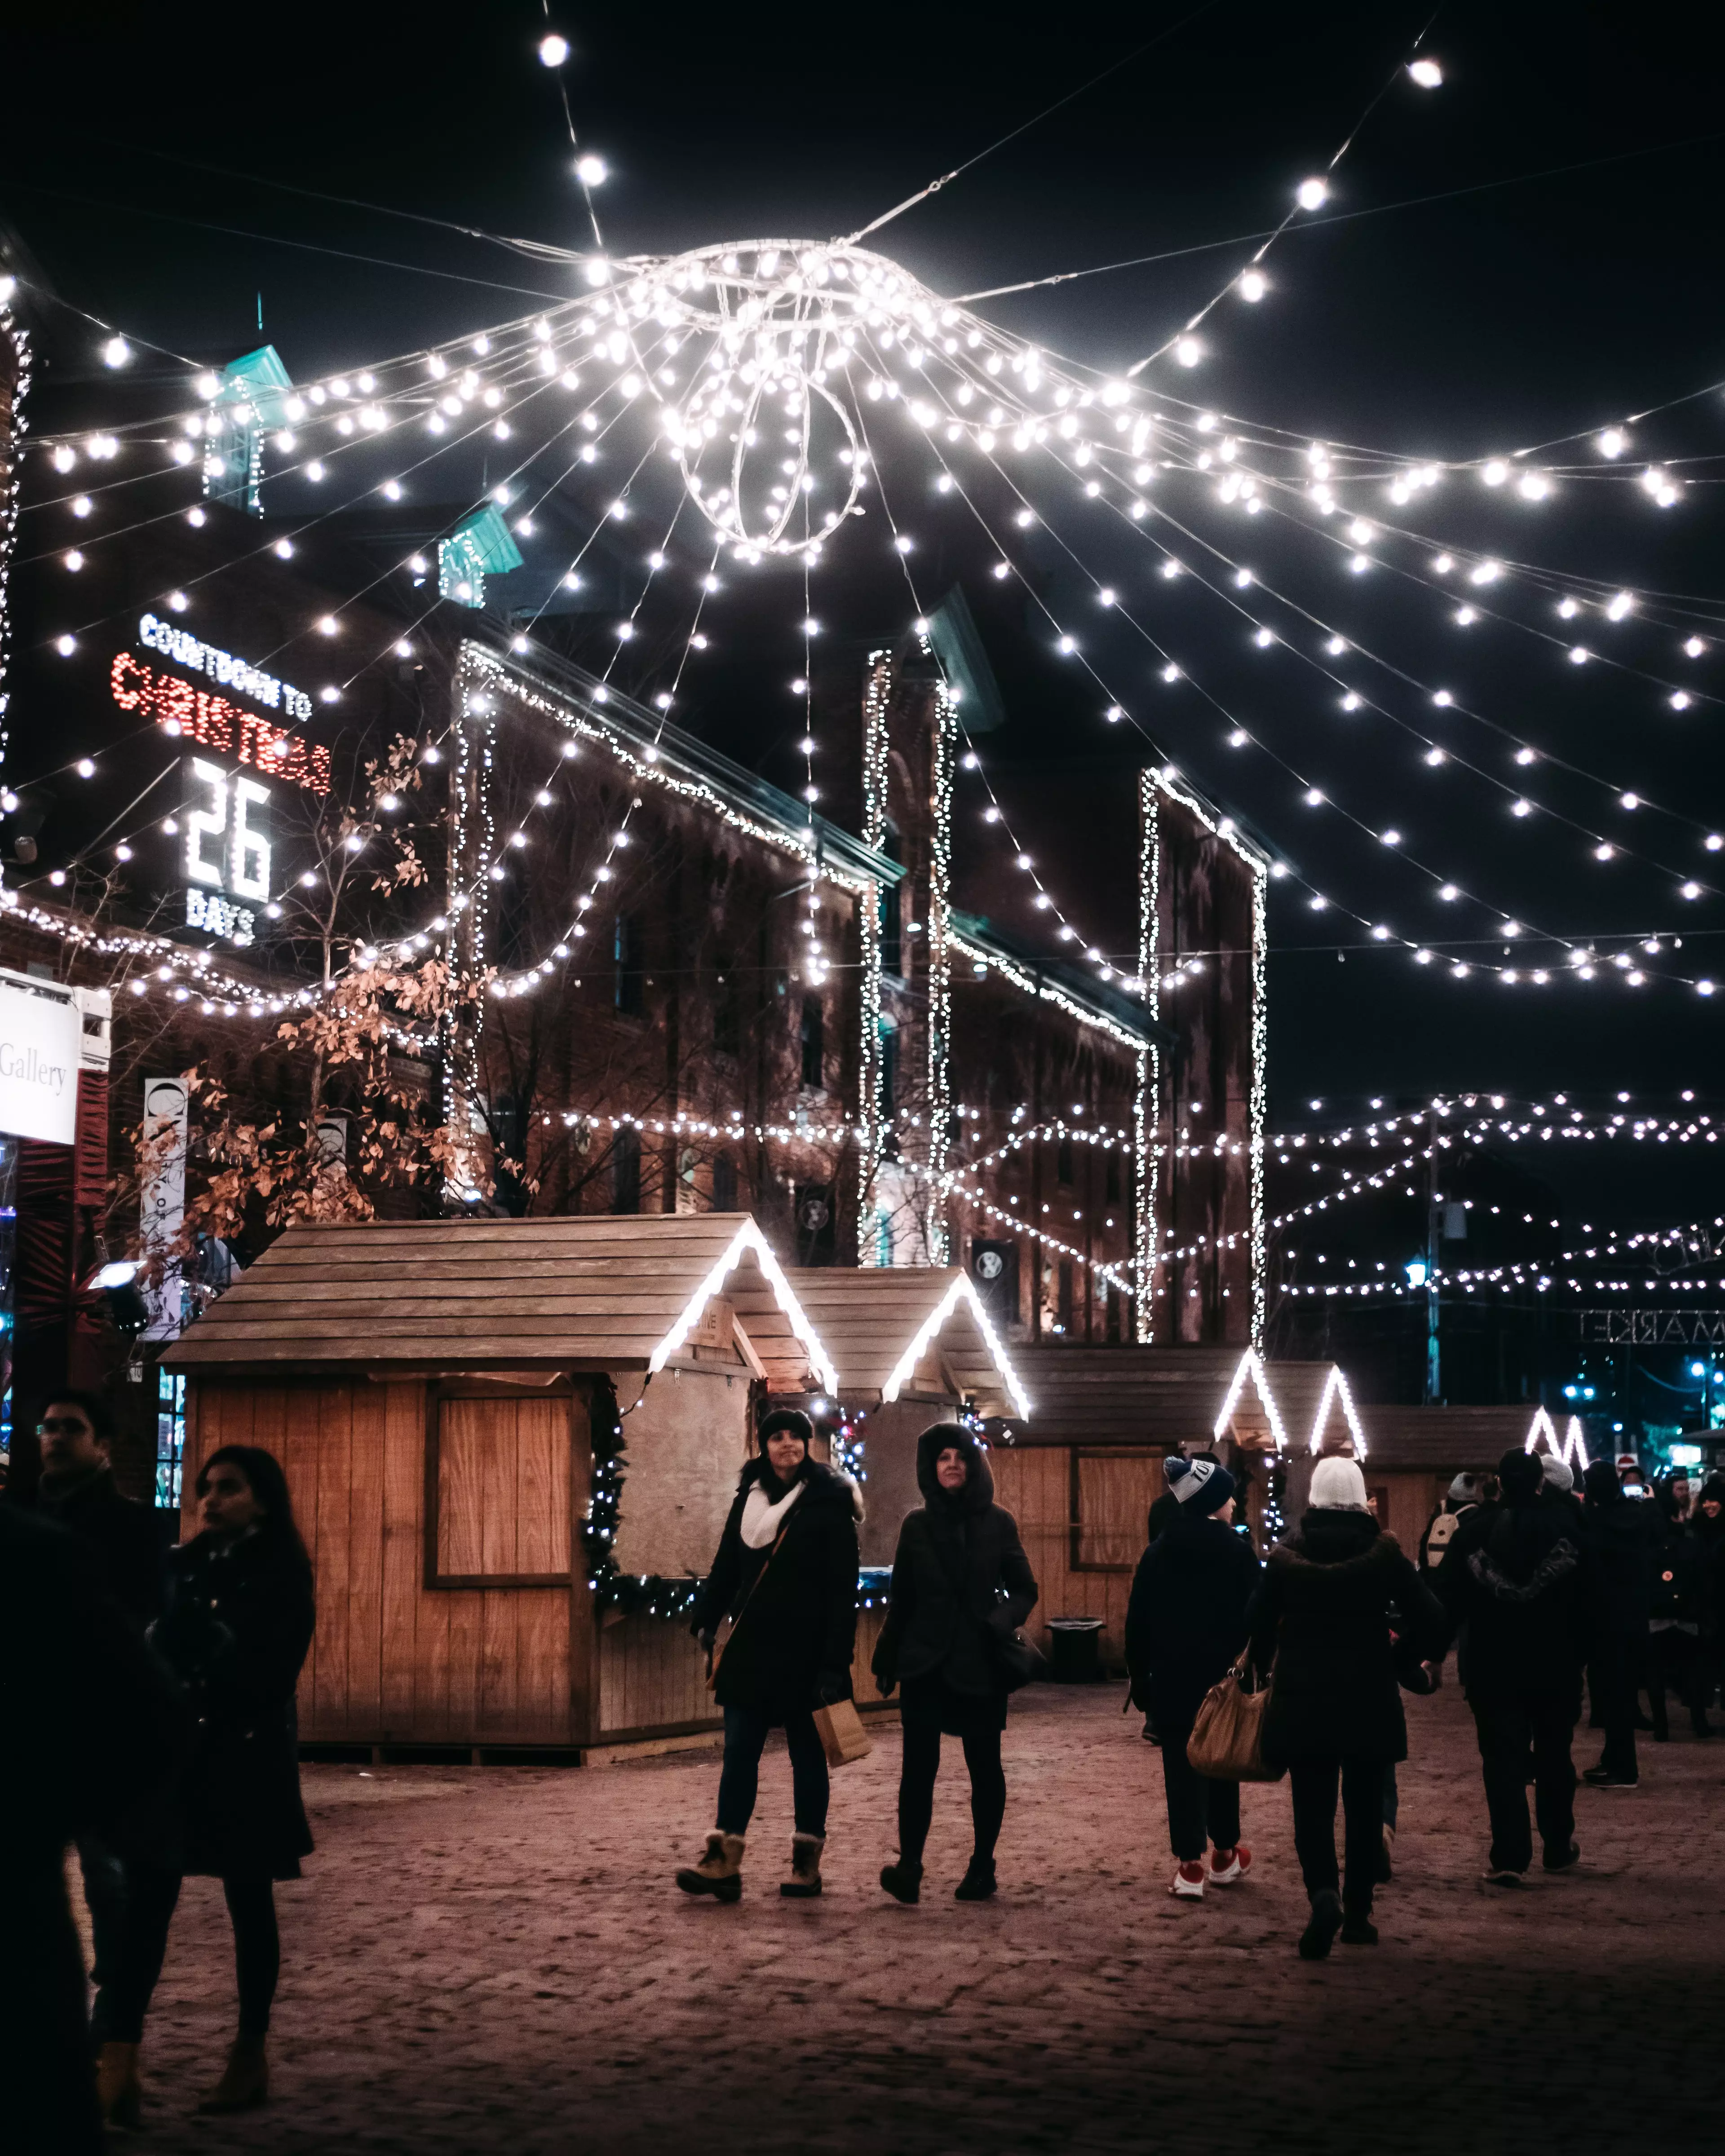 Book a last minute trip to see a Christmas market for a bargain. (